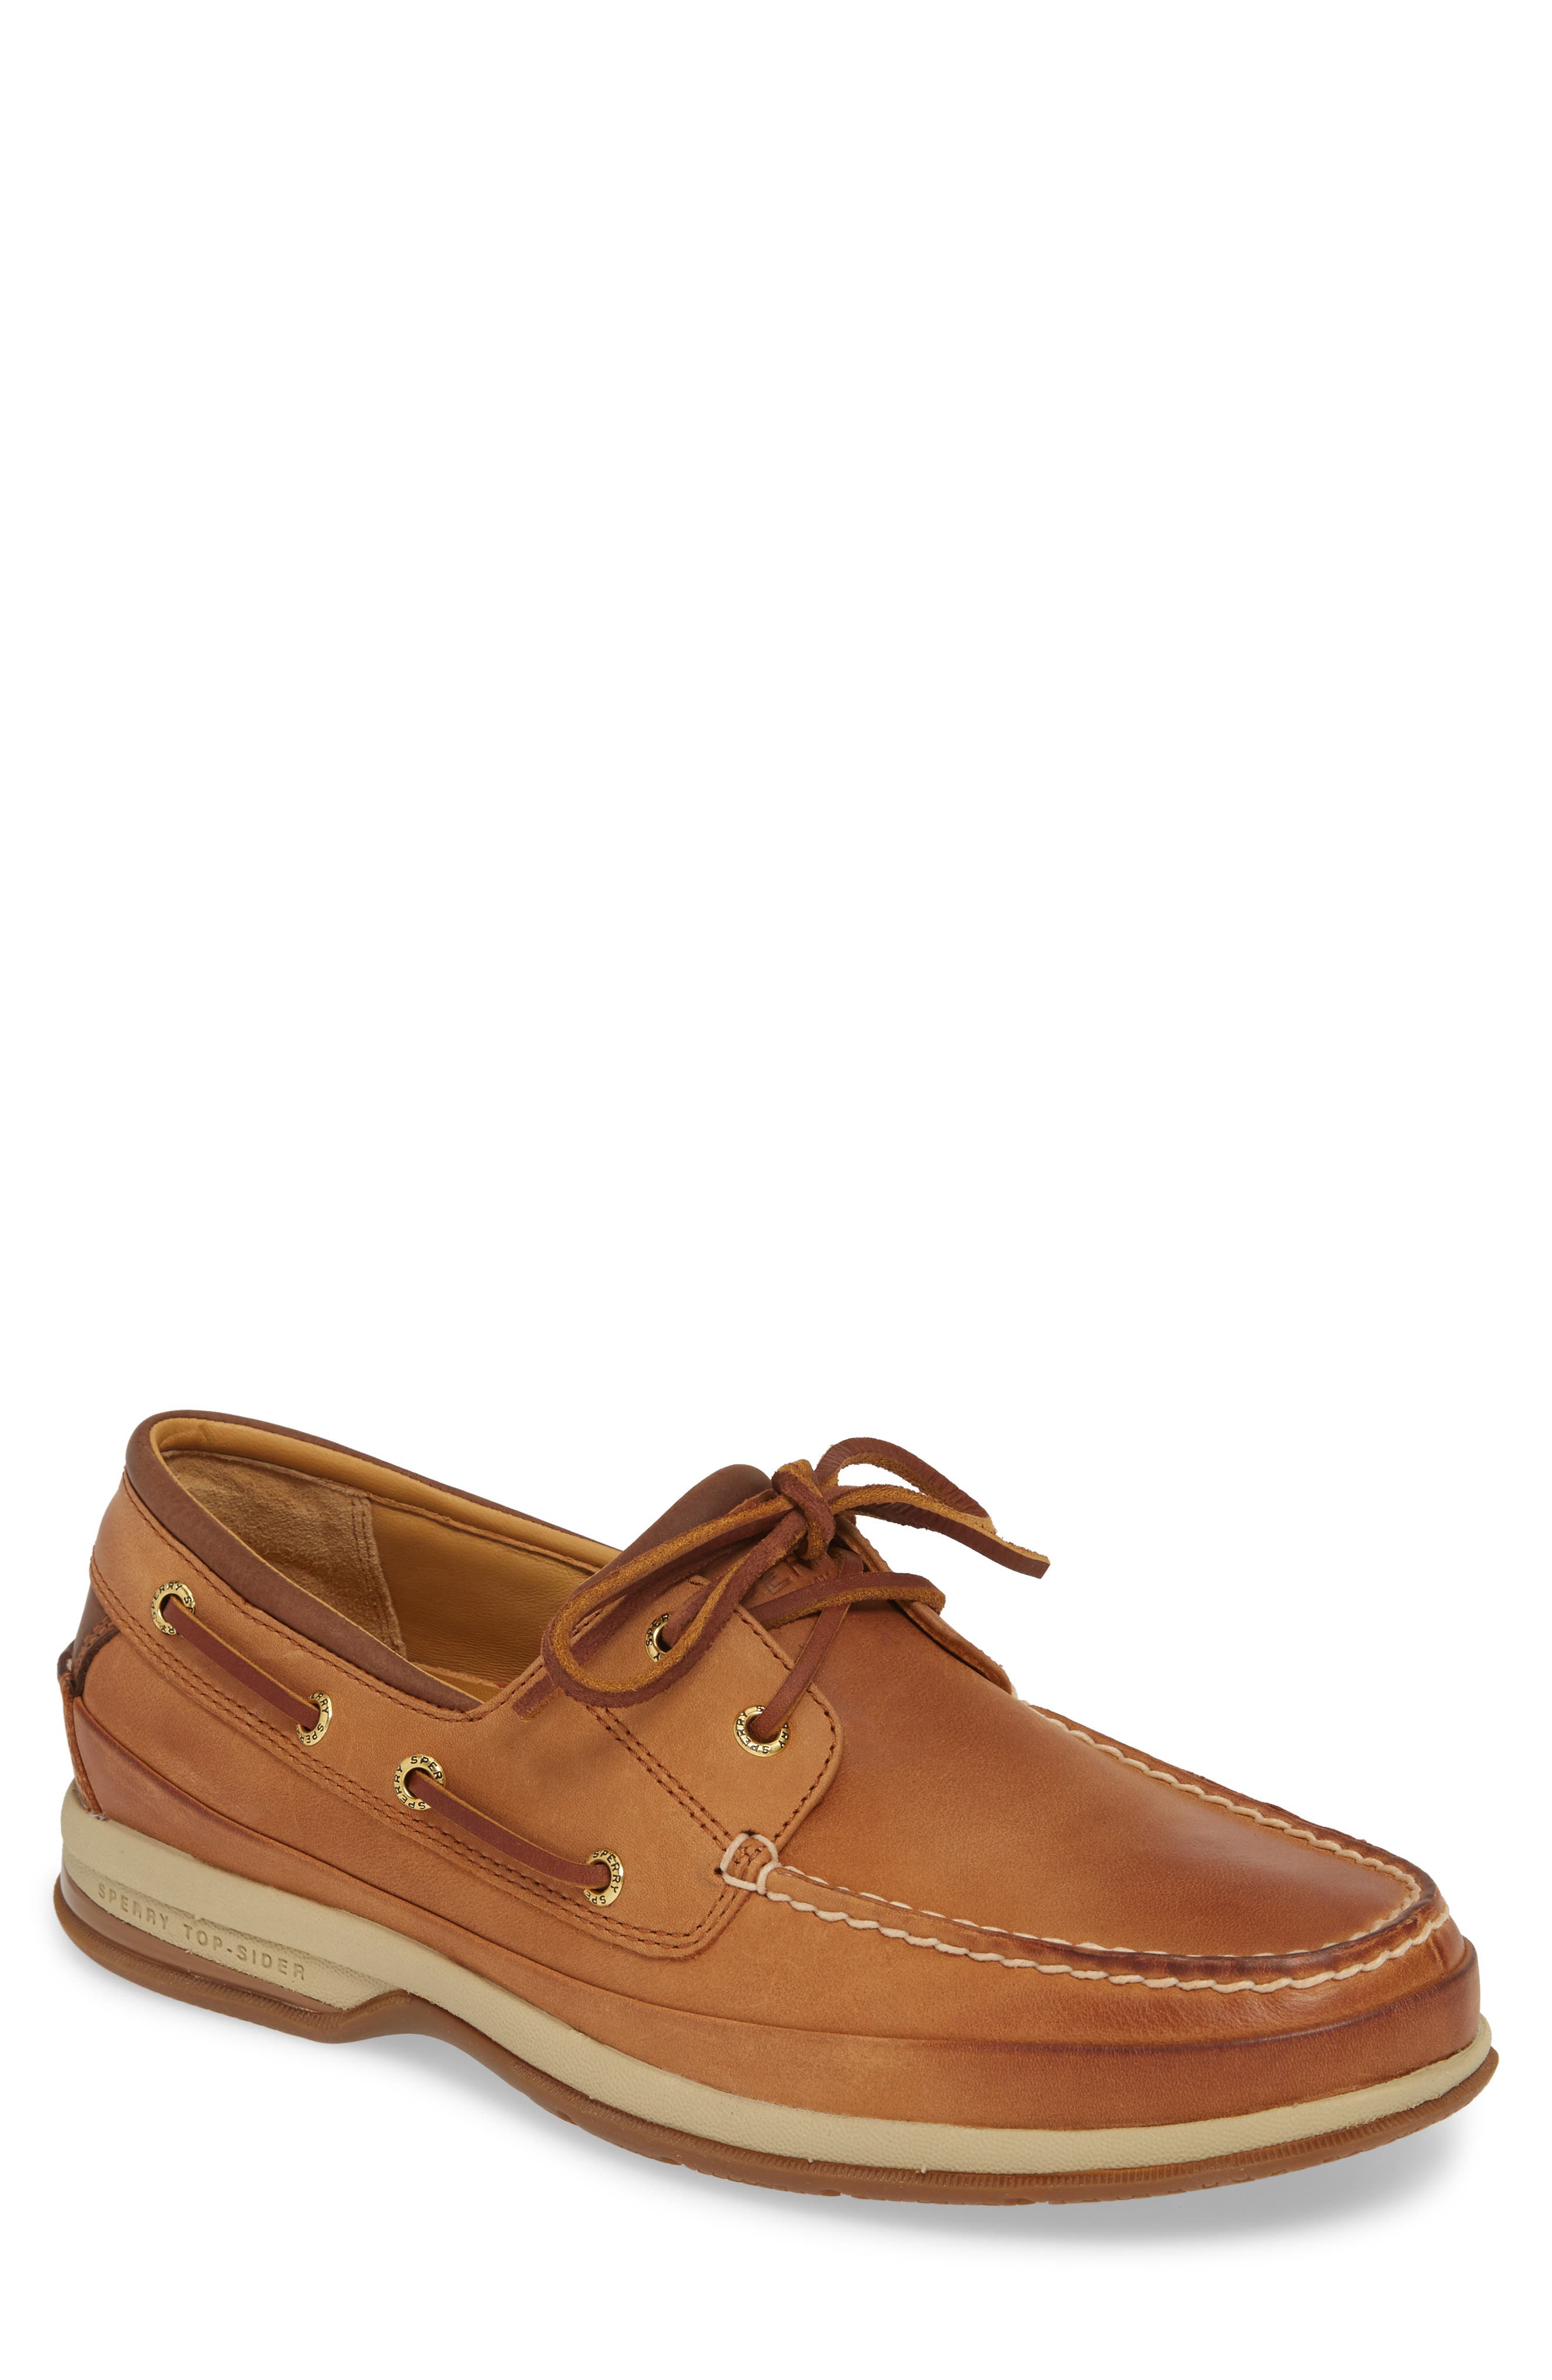 sperry asv athletic boat shoe